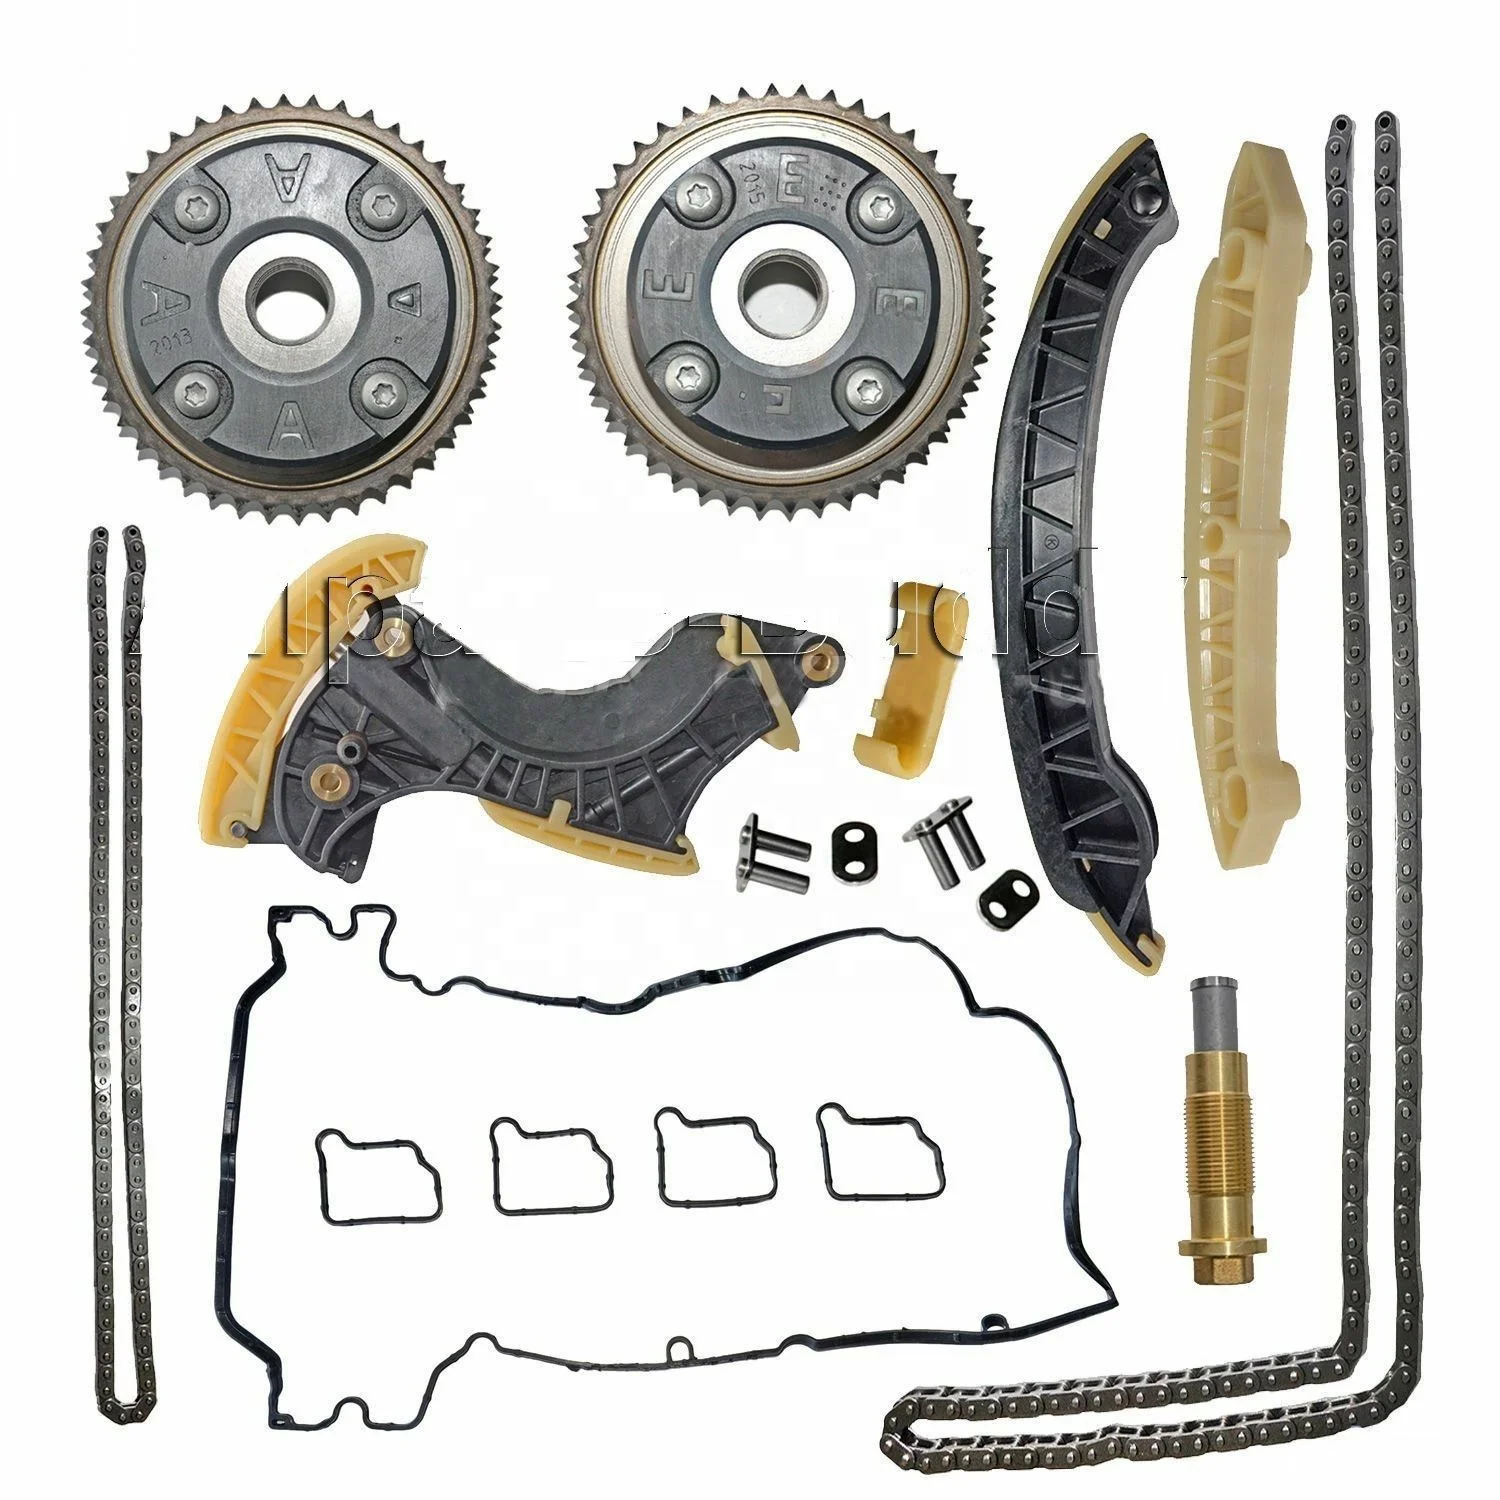 Mercedes C180 INA Engine Timing Chain Kit 5590045100 2710500611S1 New